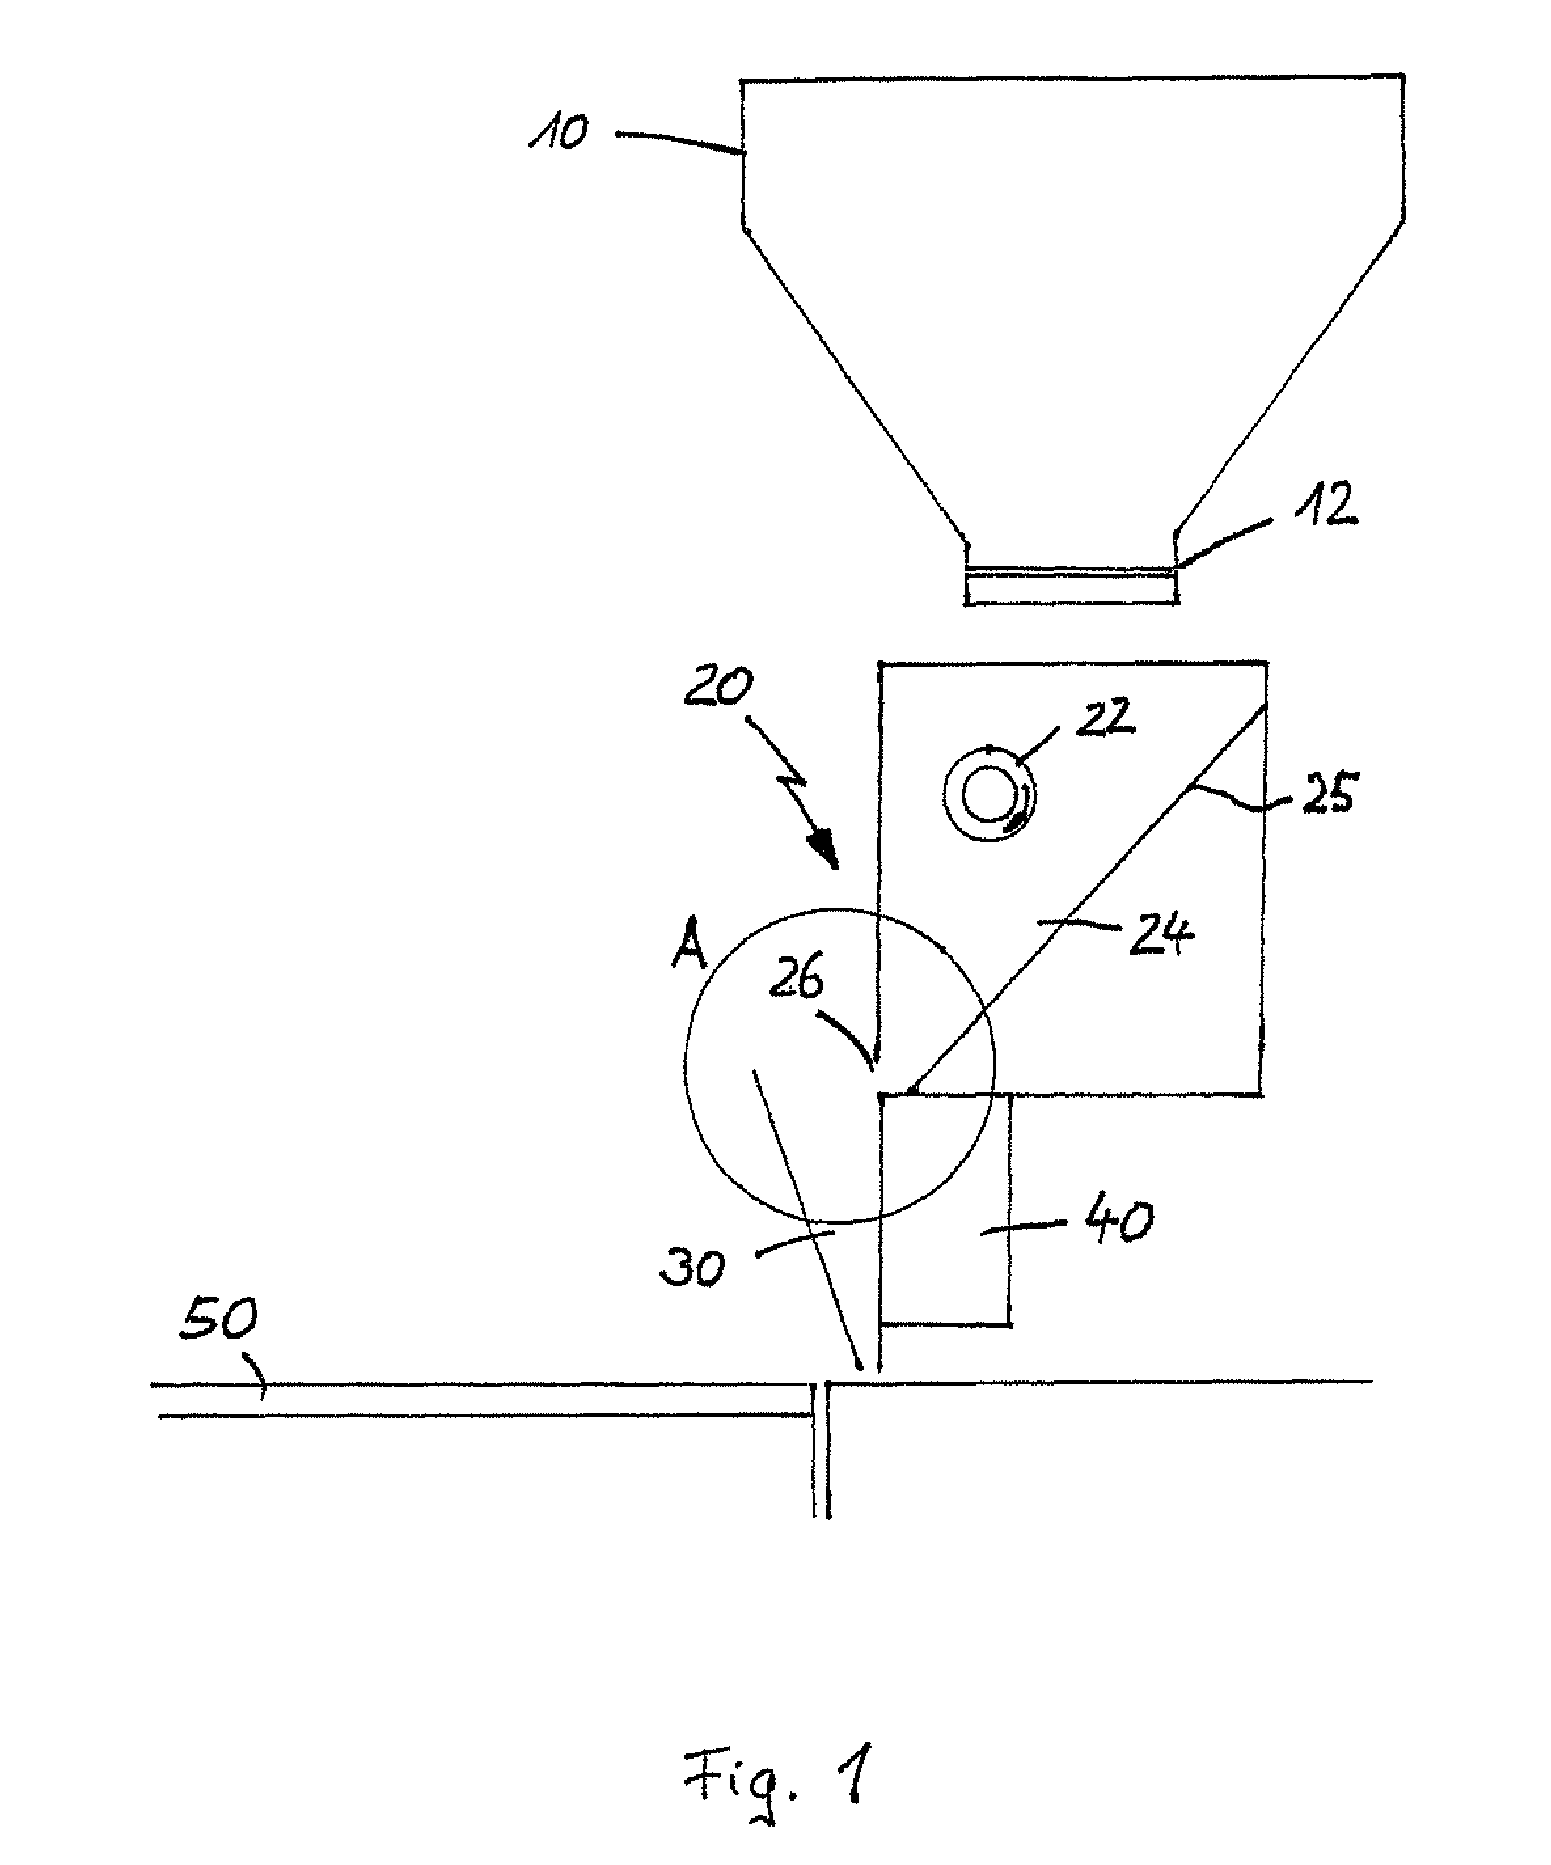 Method of, and apparatus for, applying flowable material across a surface